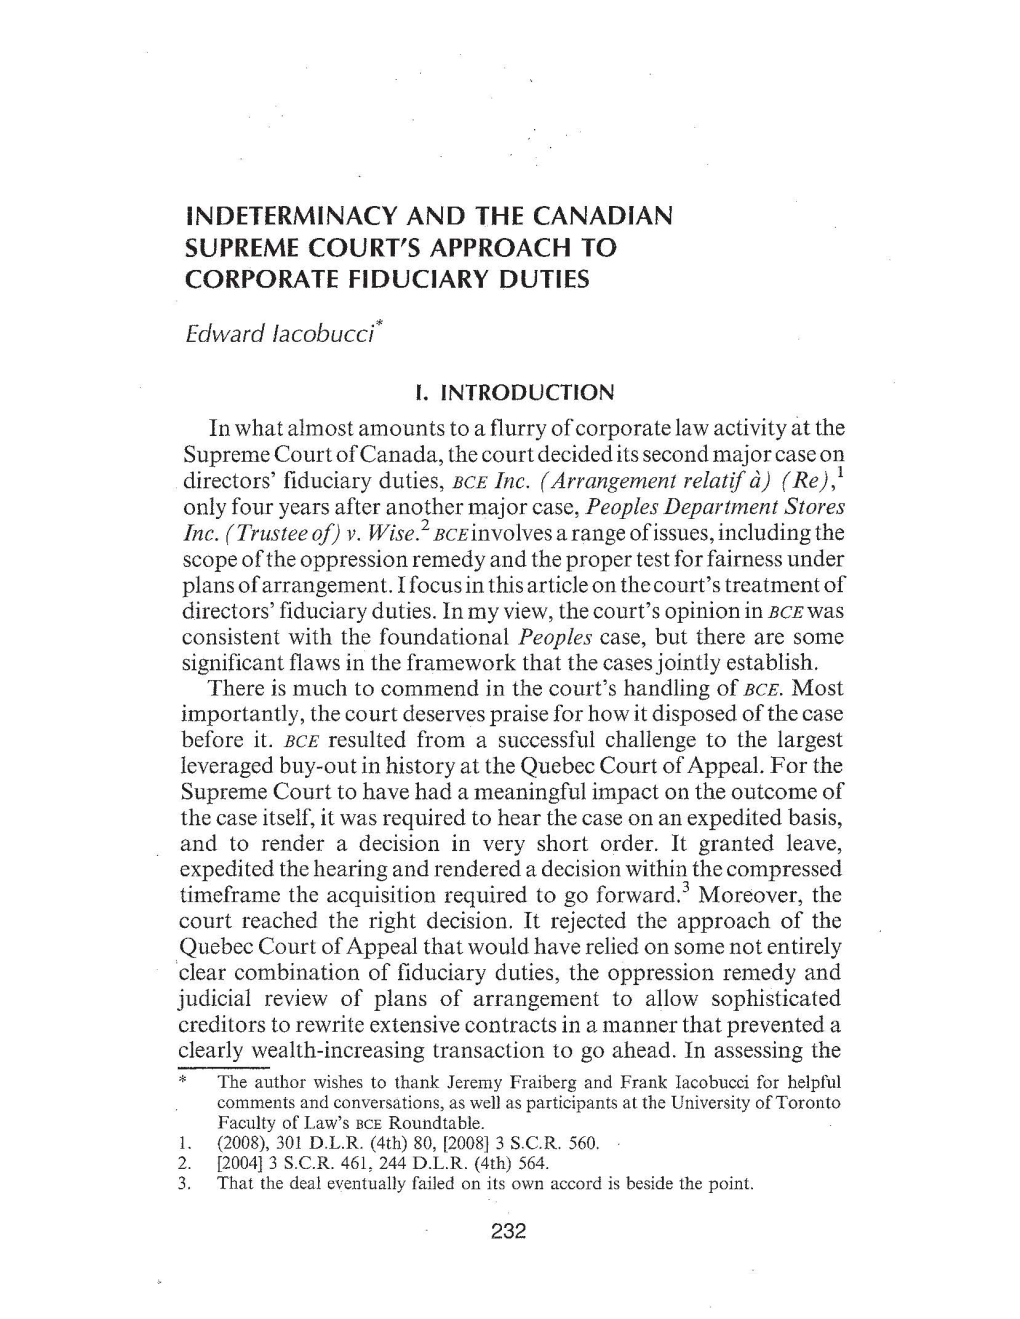 Indeterminacy and the Canadian Supreme Court's Approach to Corporate Fiduciary Duties